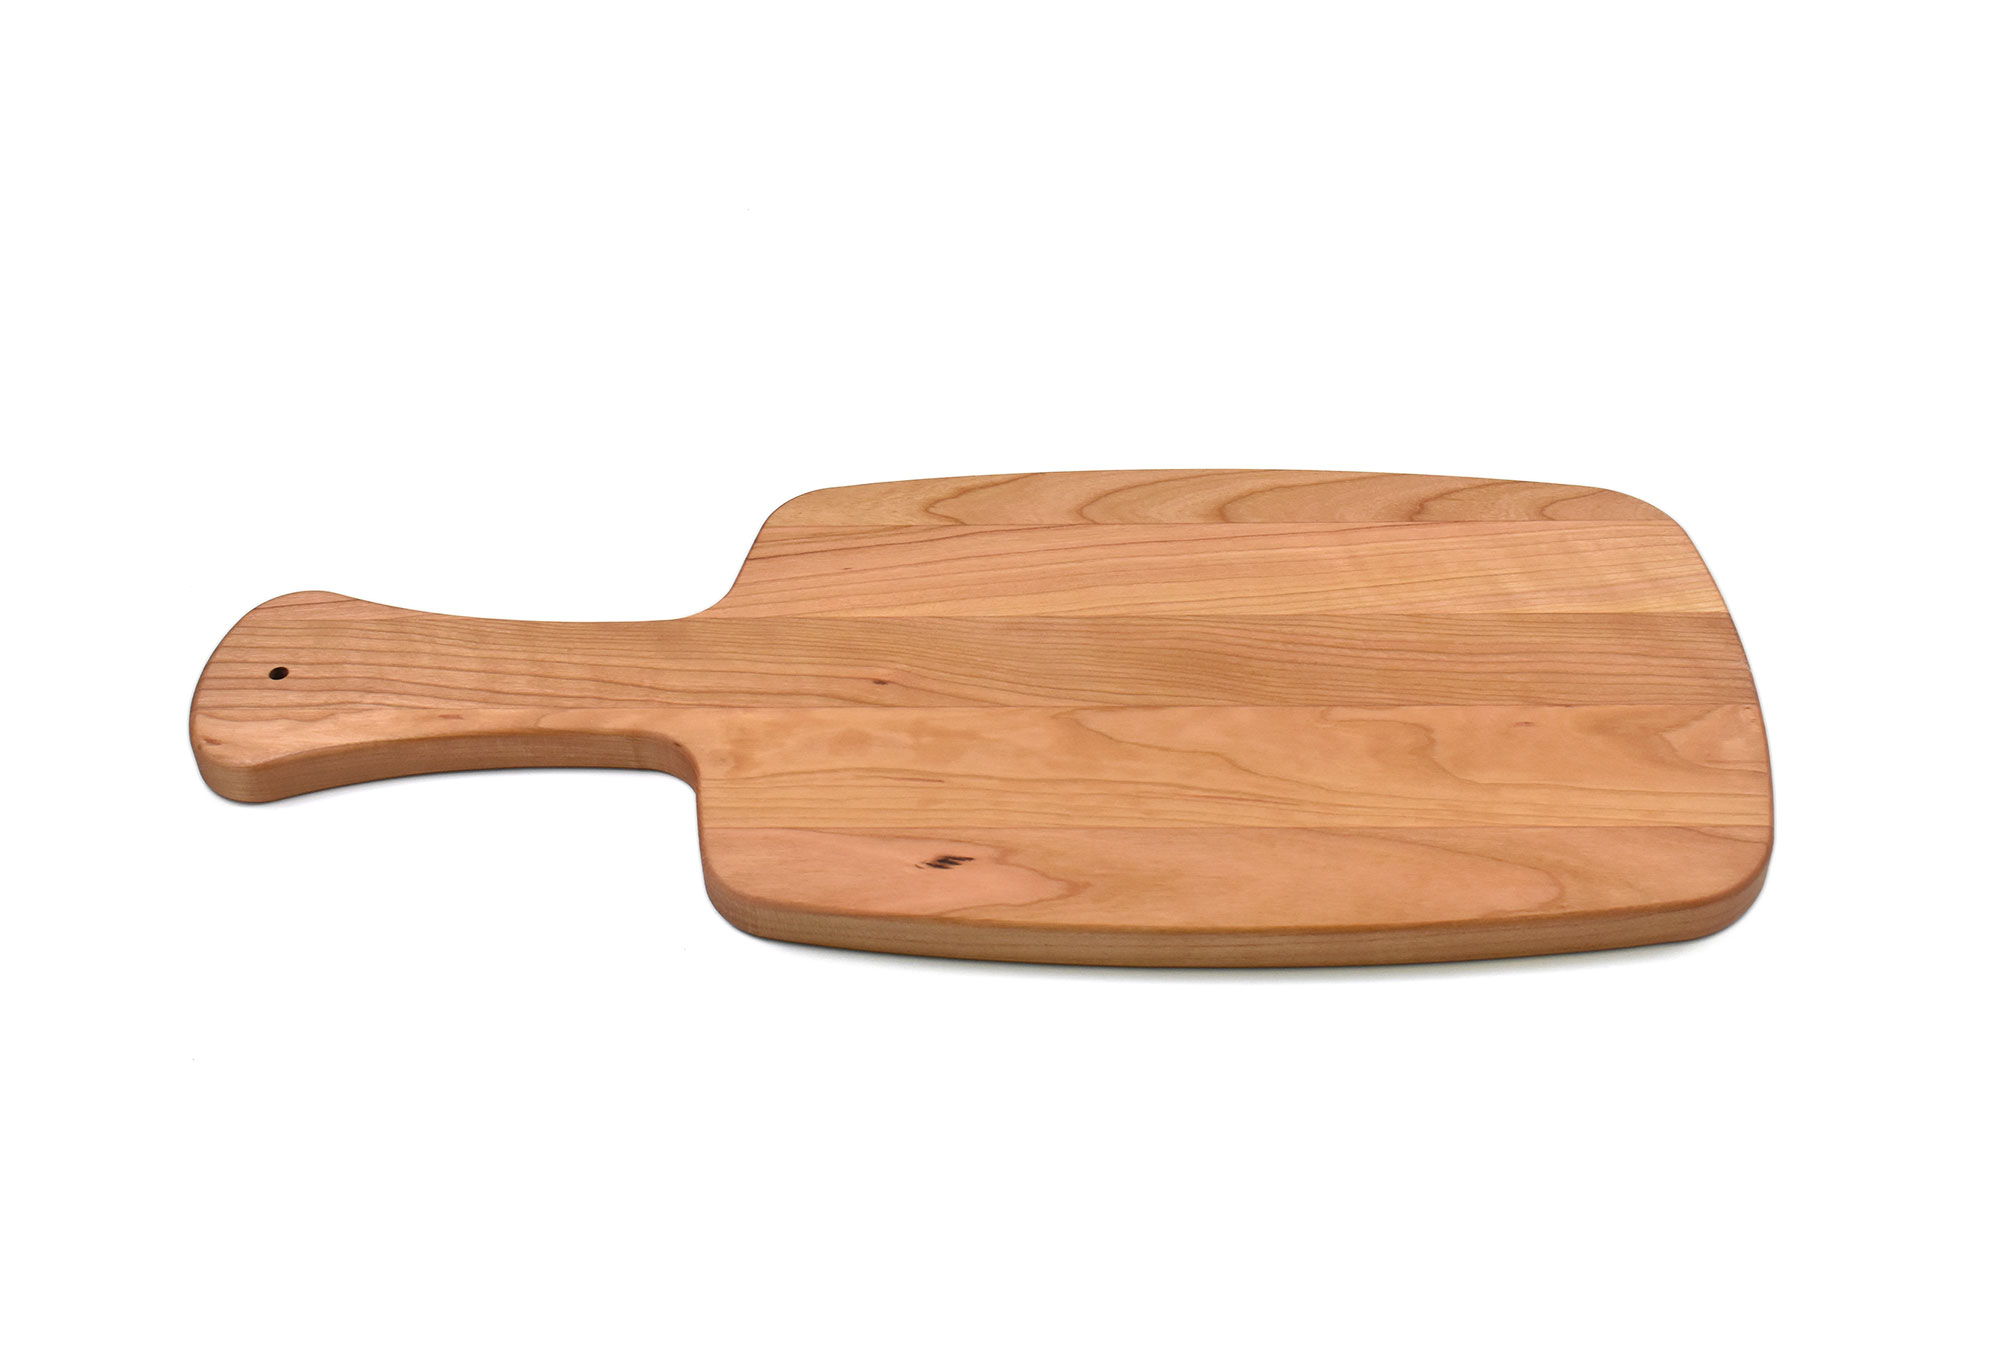 Large Cherry Cutting Board with Handle